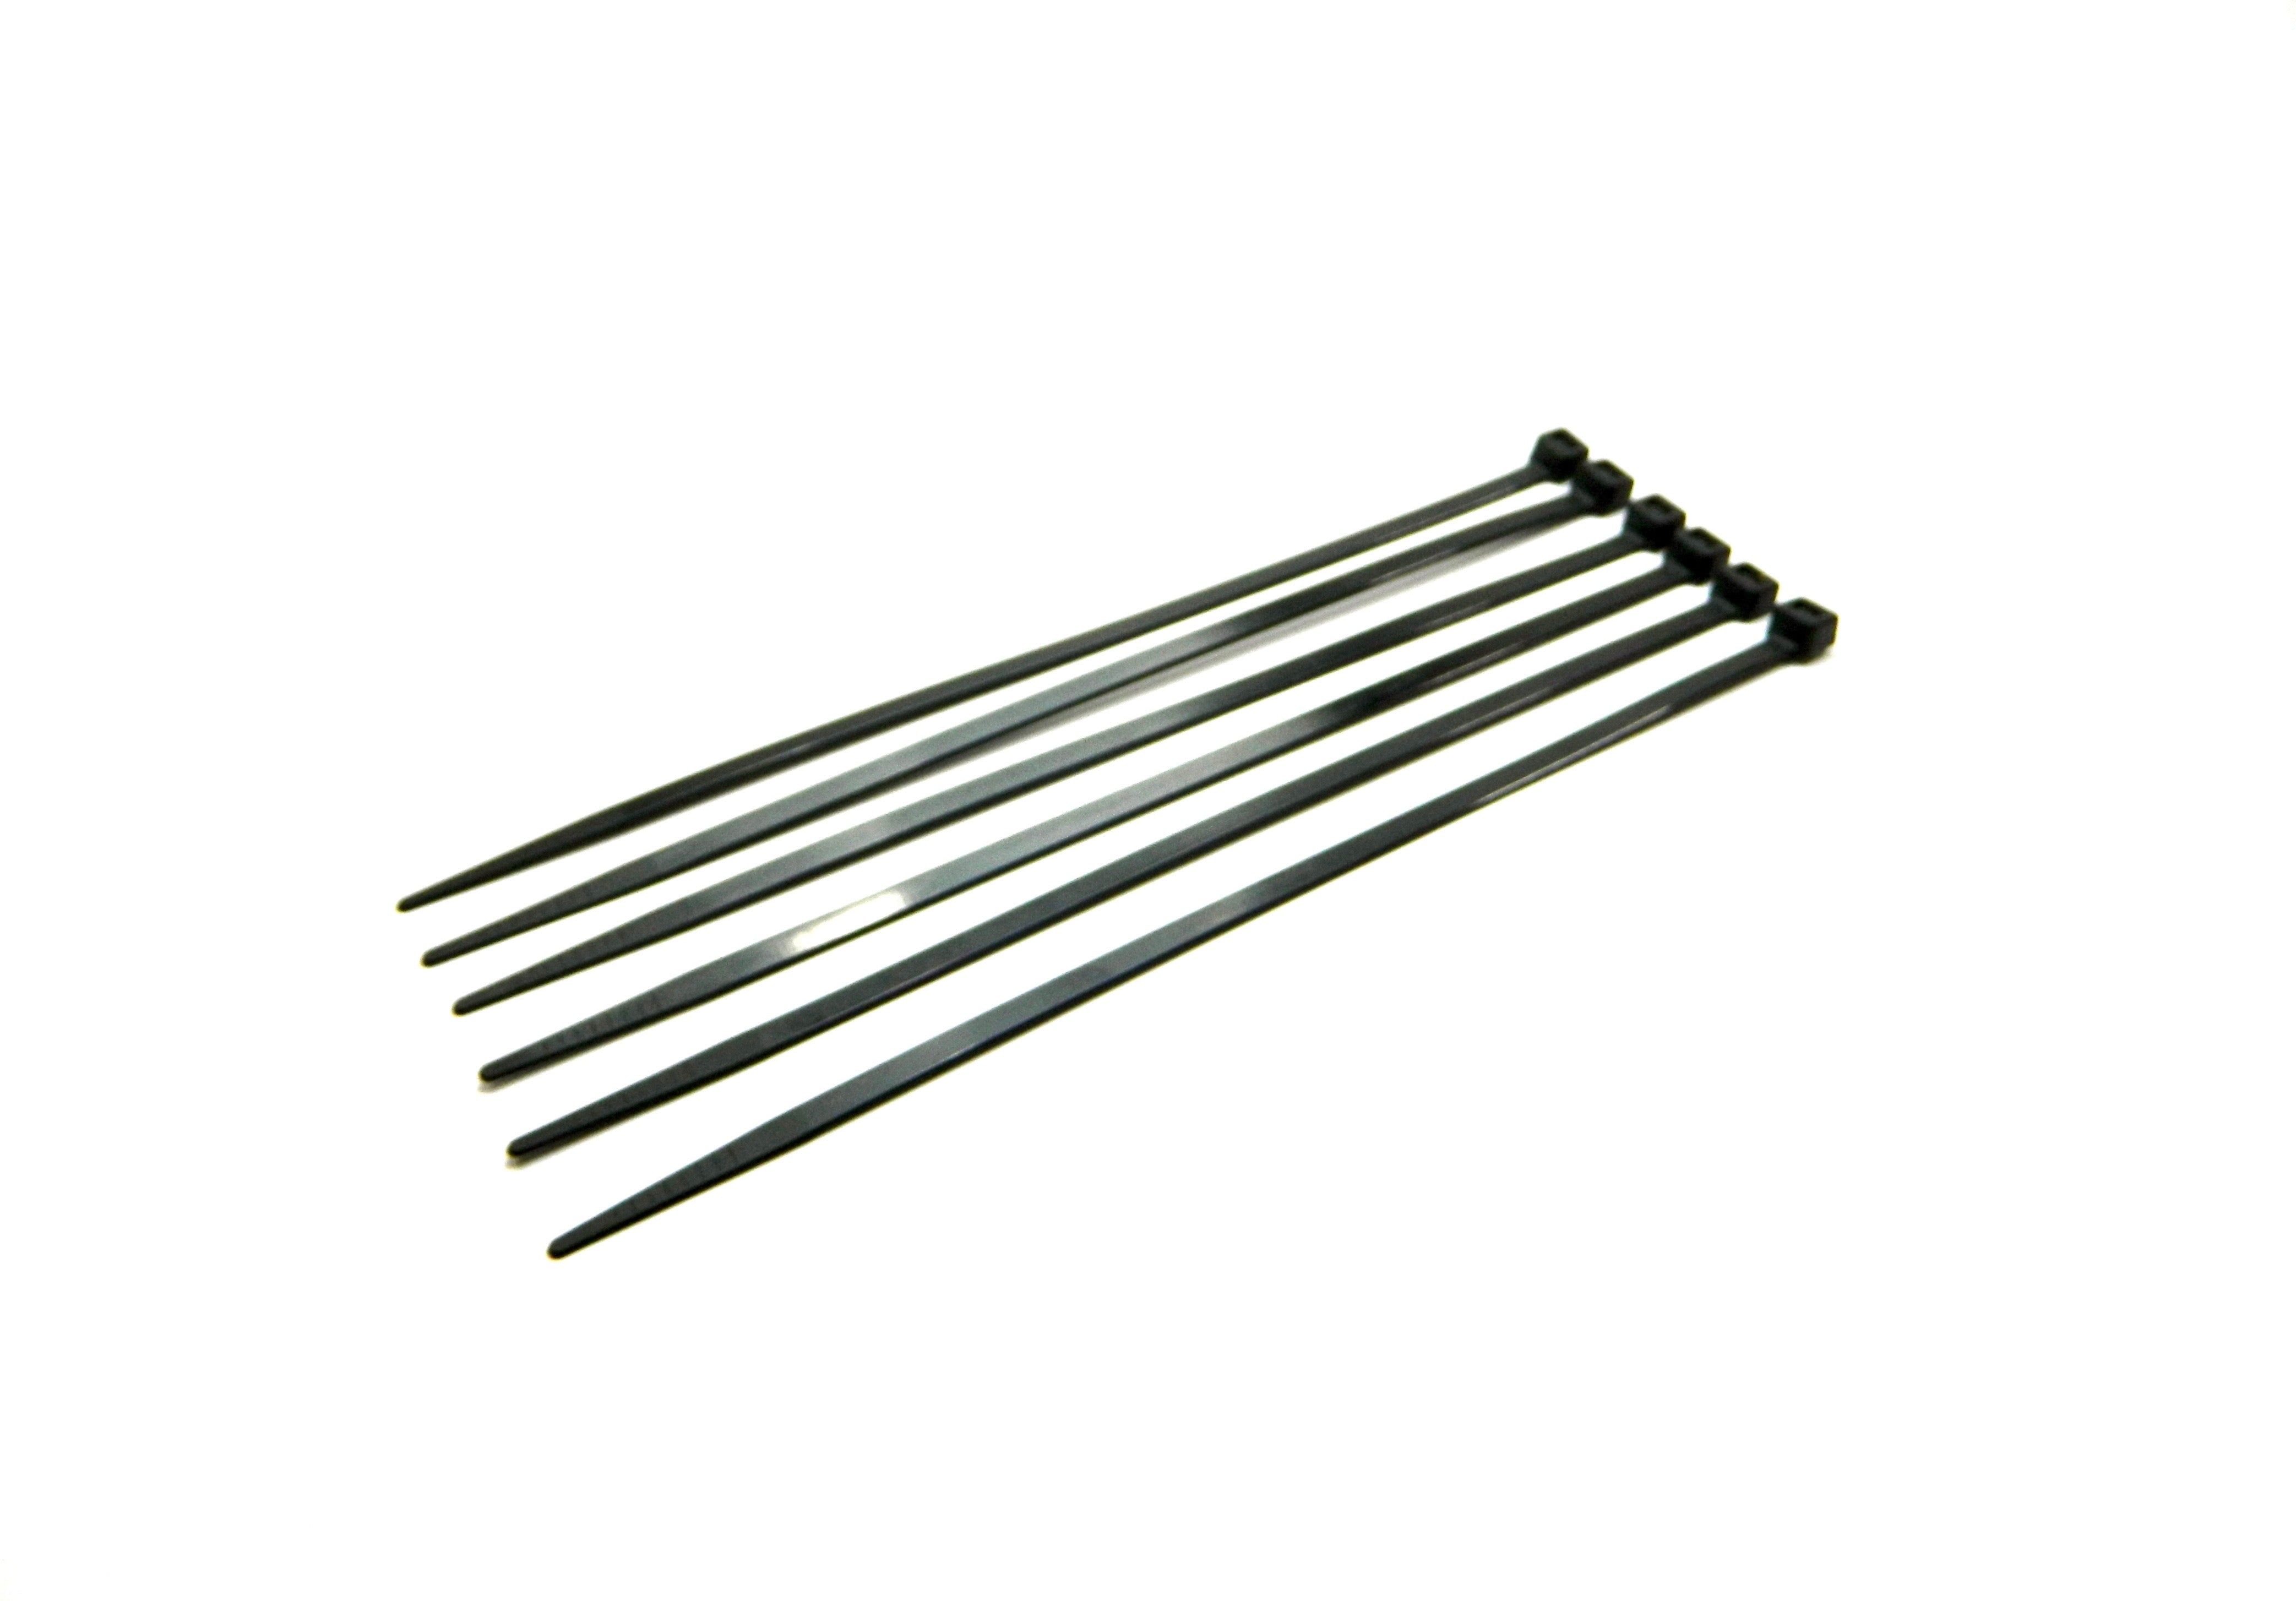 CABLE TIES - 200mm x 3.6mm QTY 100 – Auto Aer